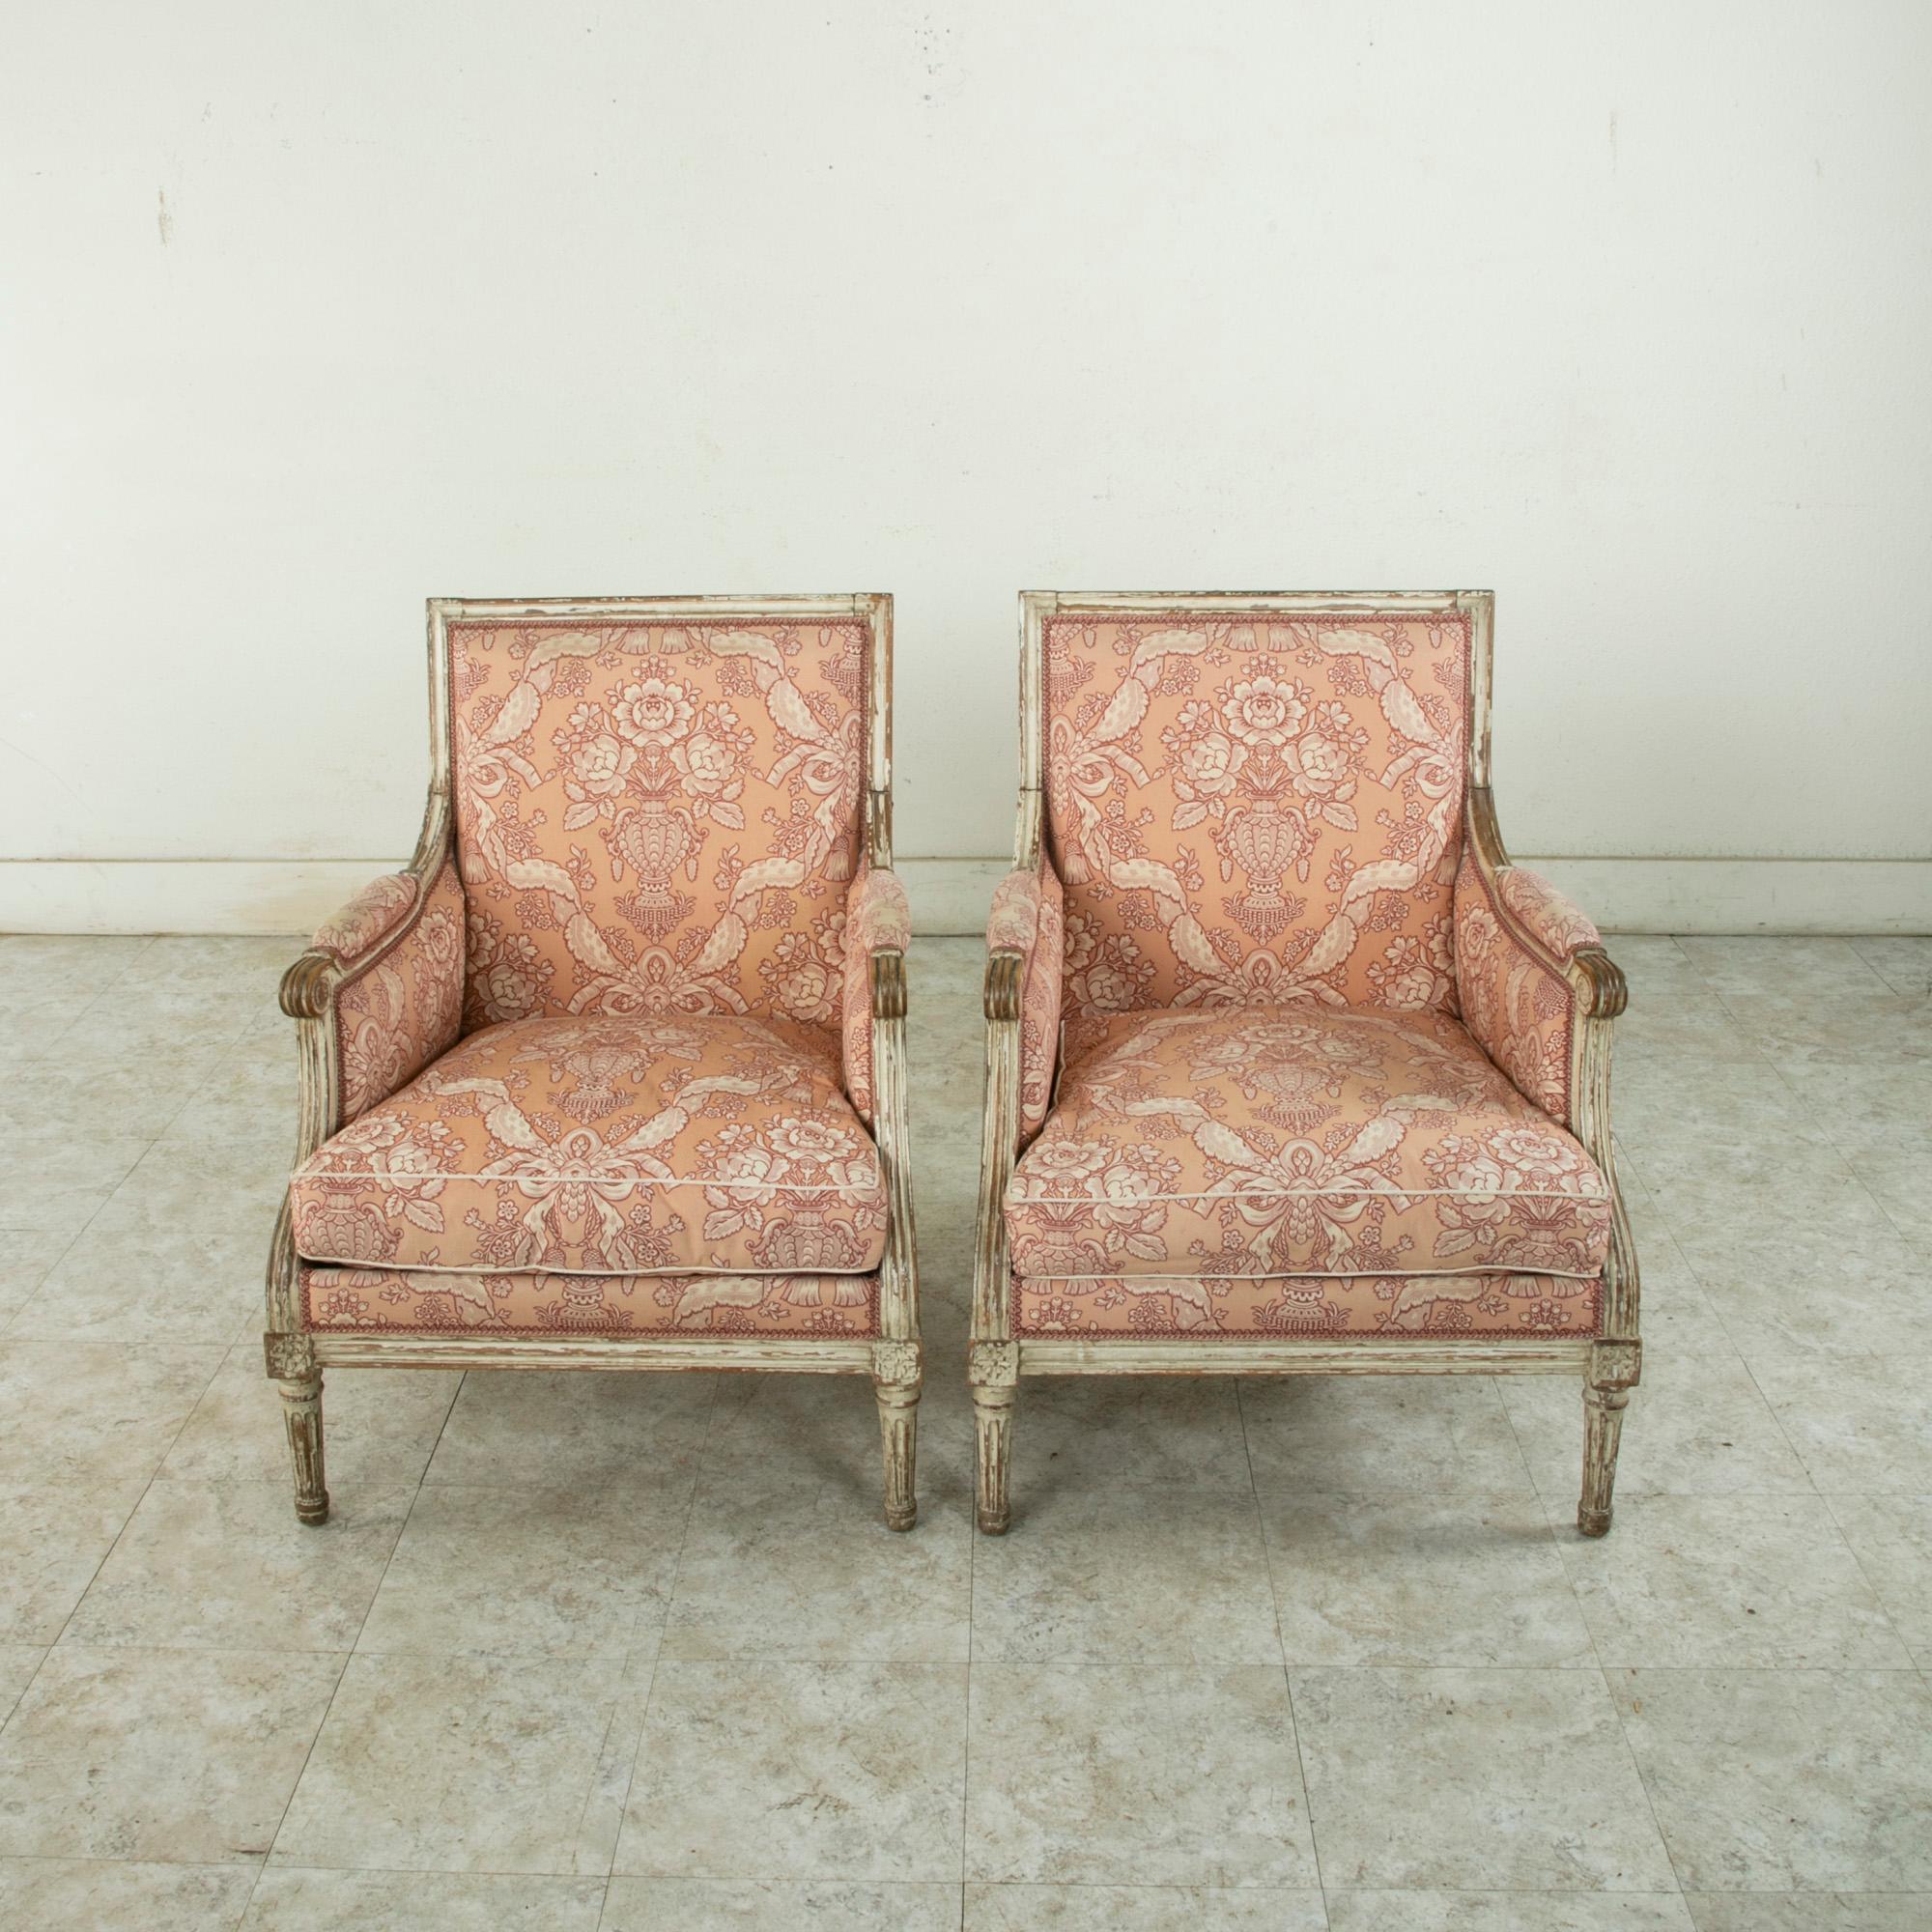 This pair of mid-twentieth century French Louis XVI style bergeres or armchairs features carved rosettes at the die joints and scrolling armrests. The chairs rest on tapered fluted legs. The seats, back, and arms are upholstered in a pink fabric